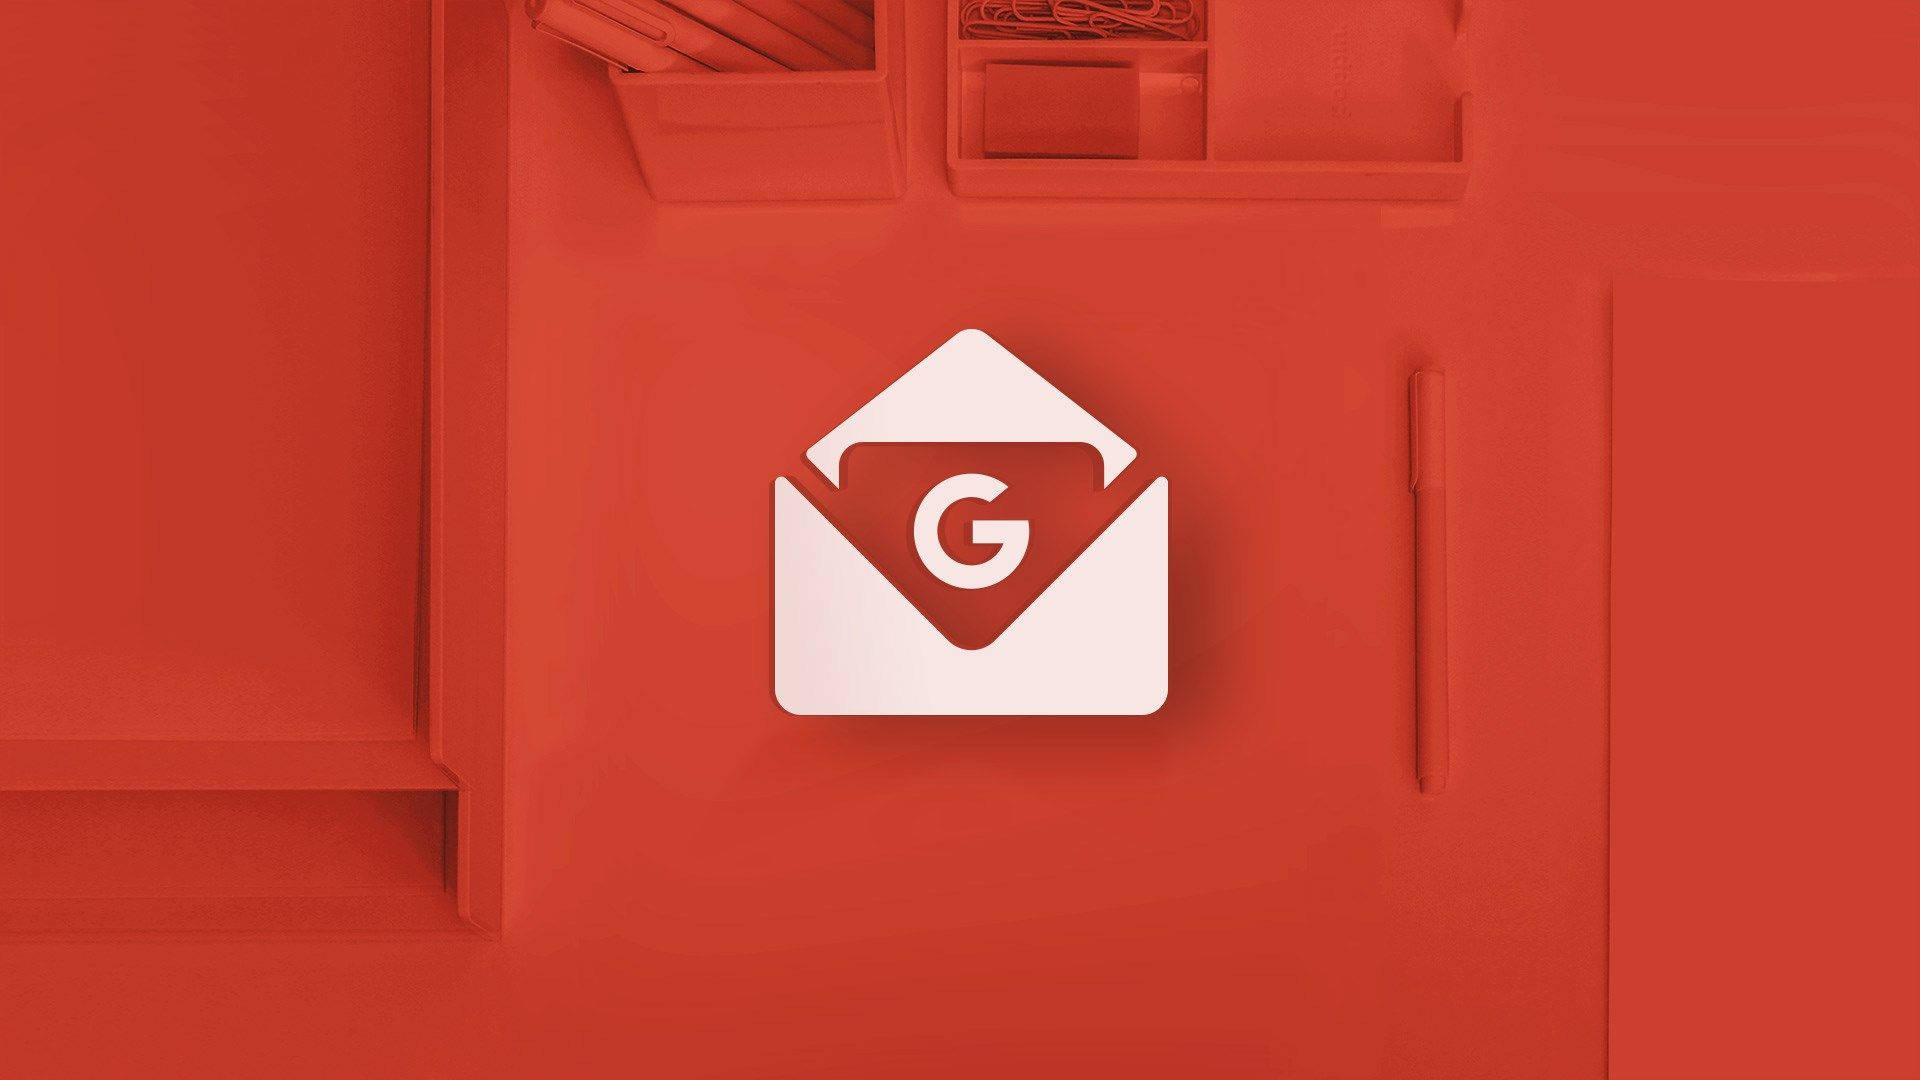 Free Gmail Wallpaper Downloads, [100+] Gmail Wallpapers for FREE |  